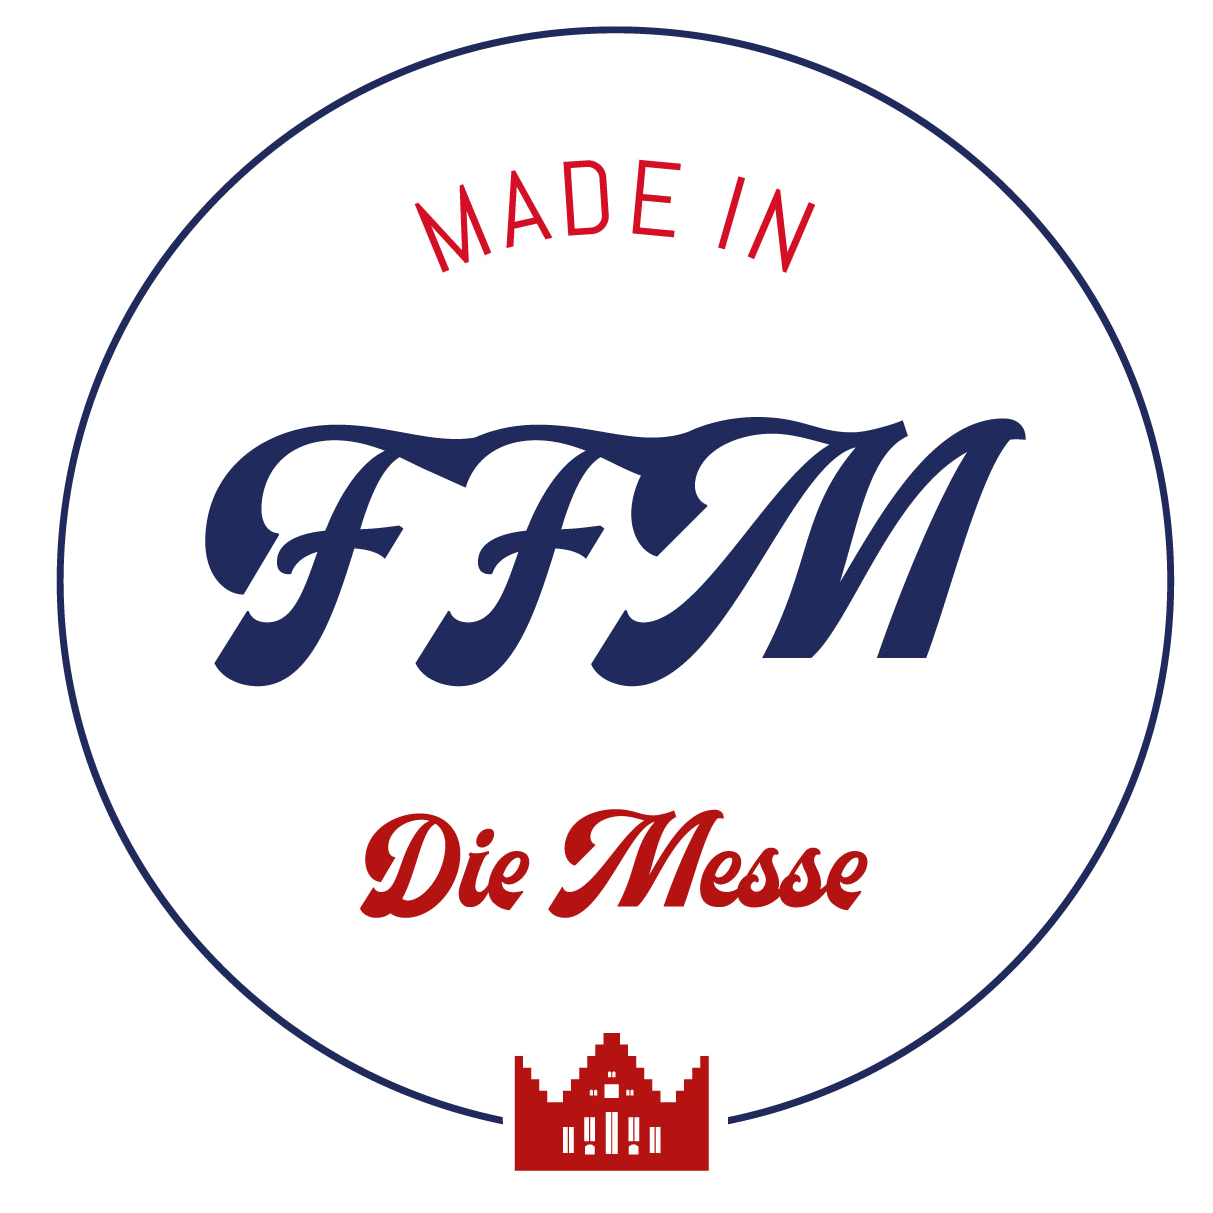 Made in GmbH